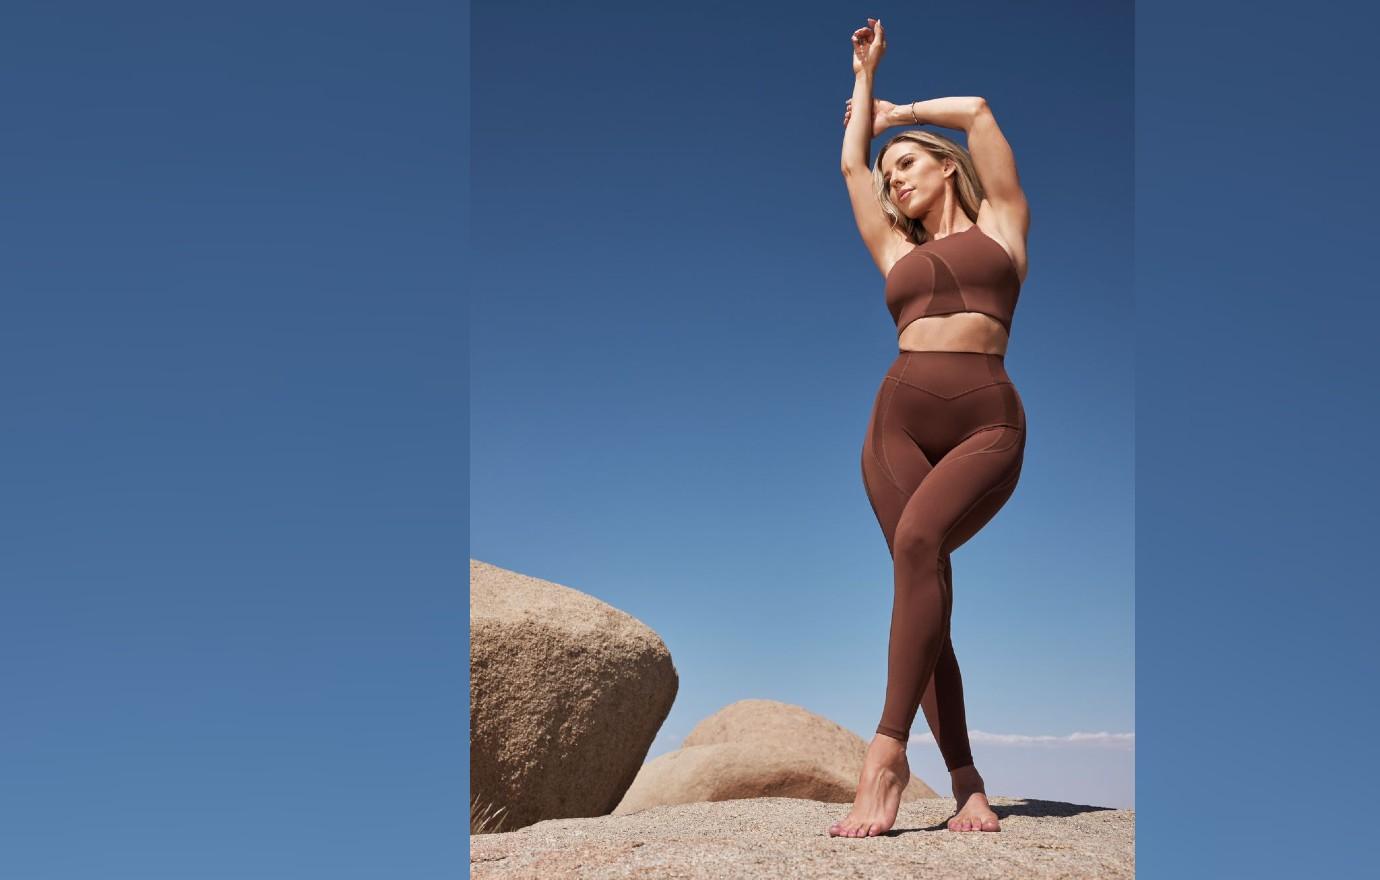 Heidi Somers Dishes On Fitness Career, New App